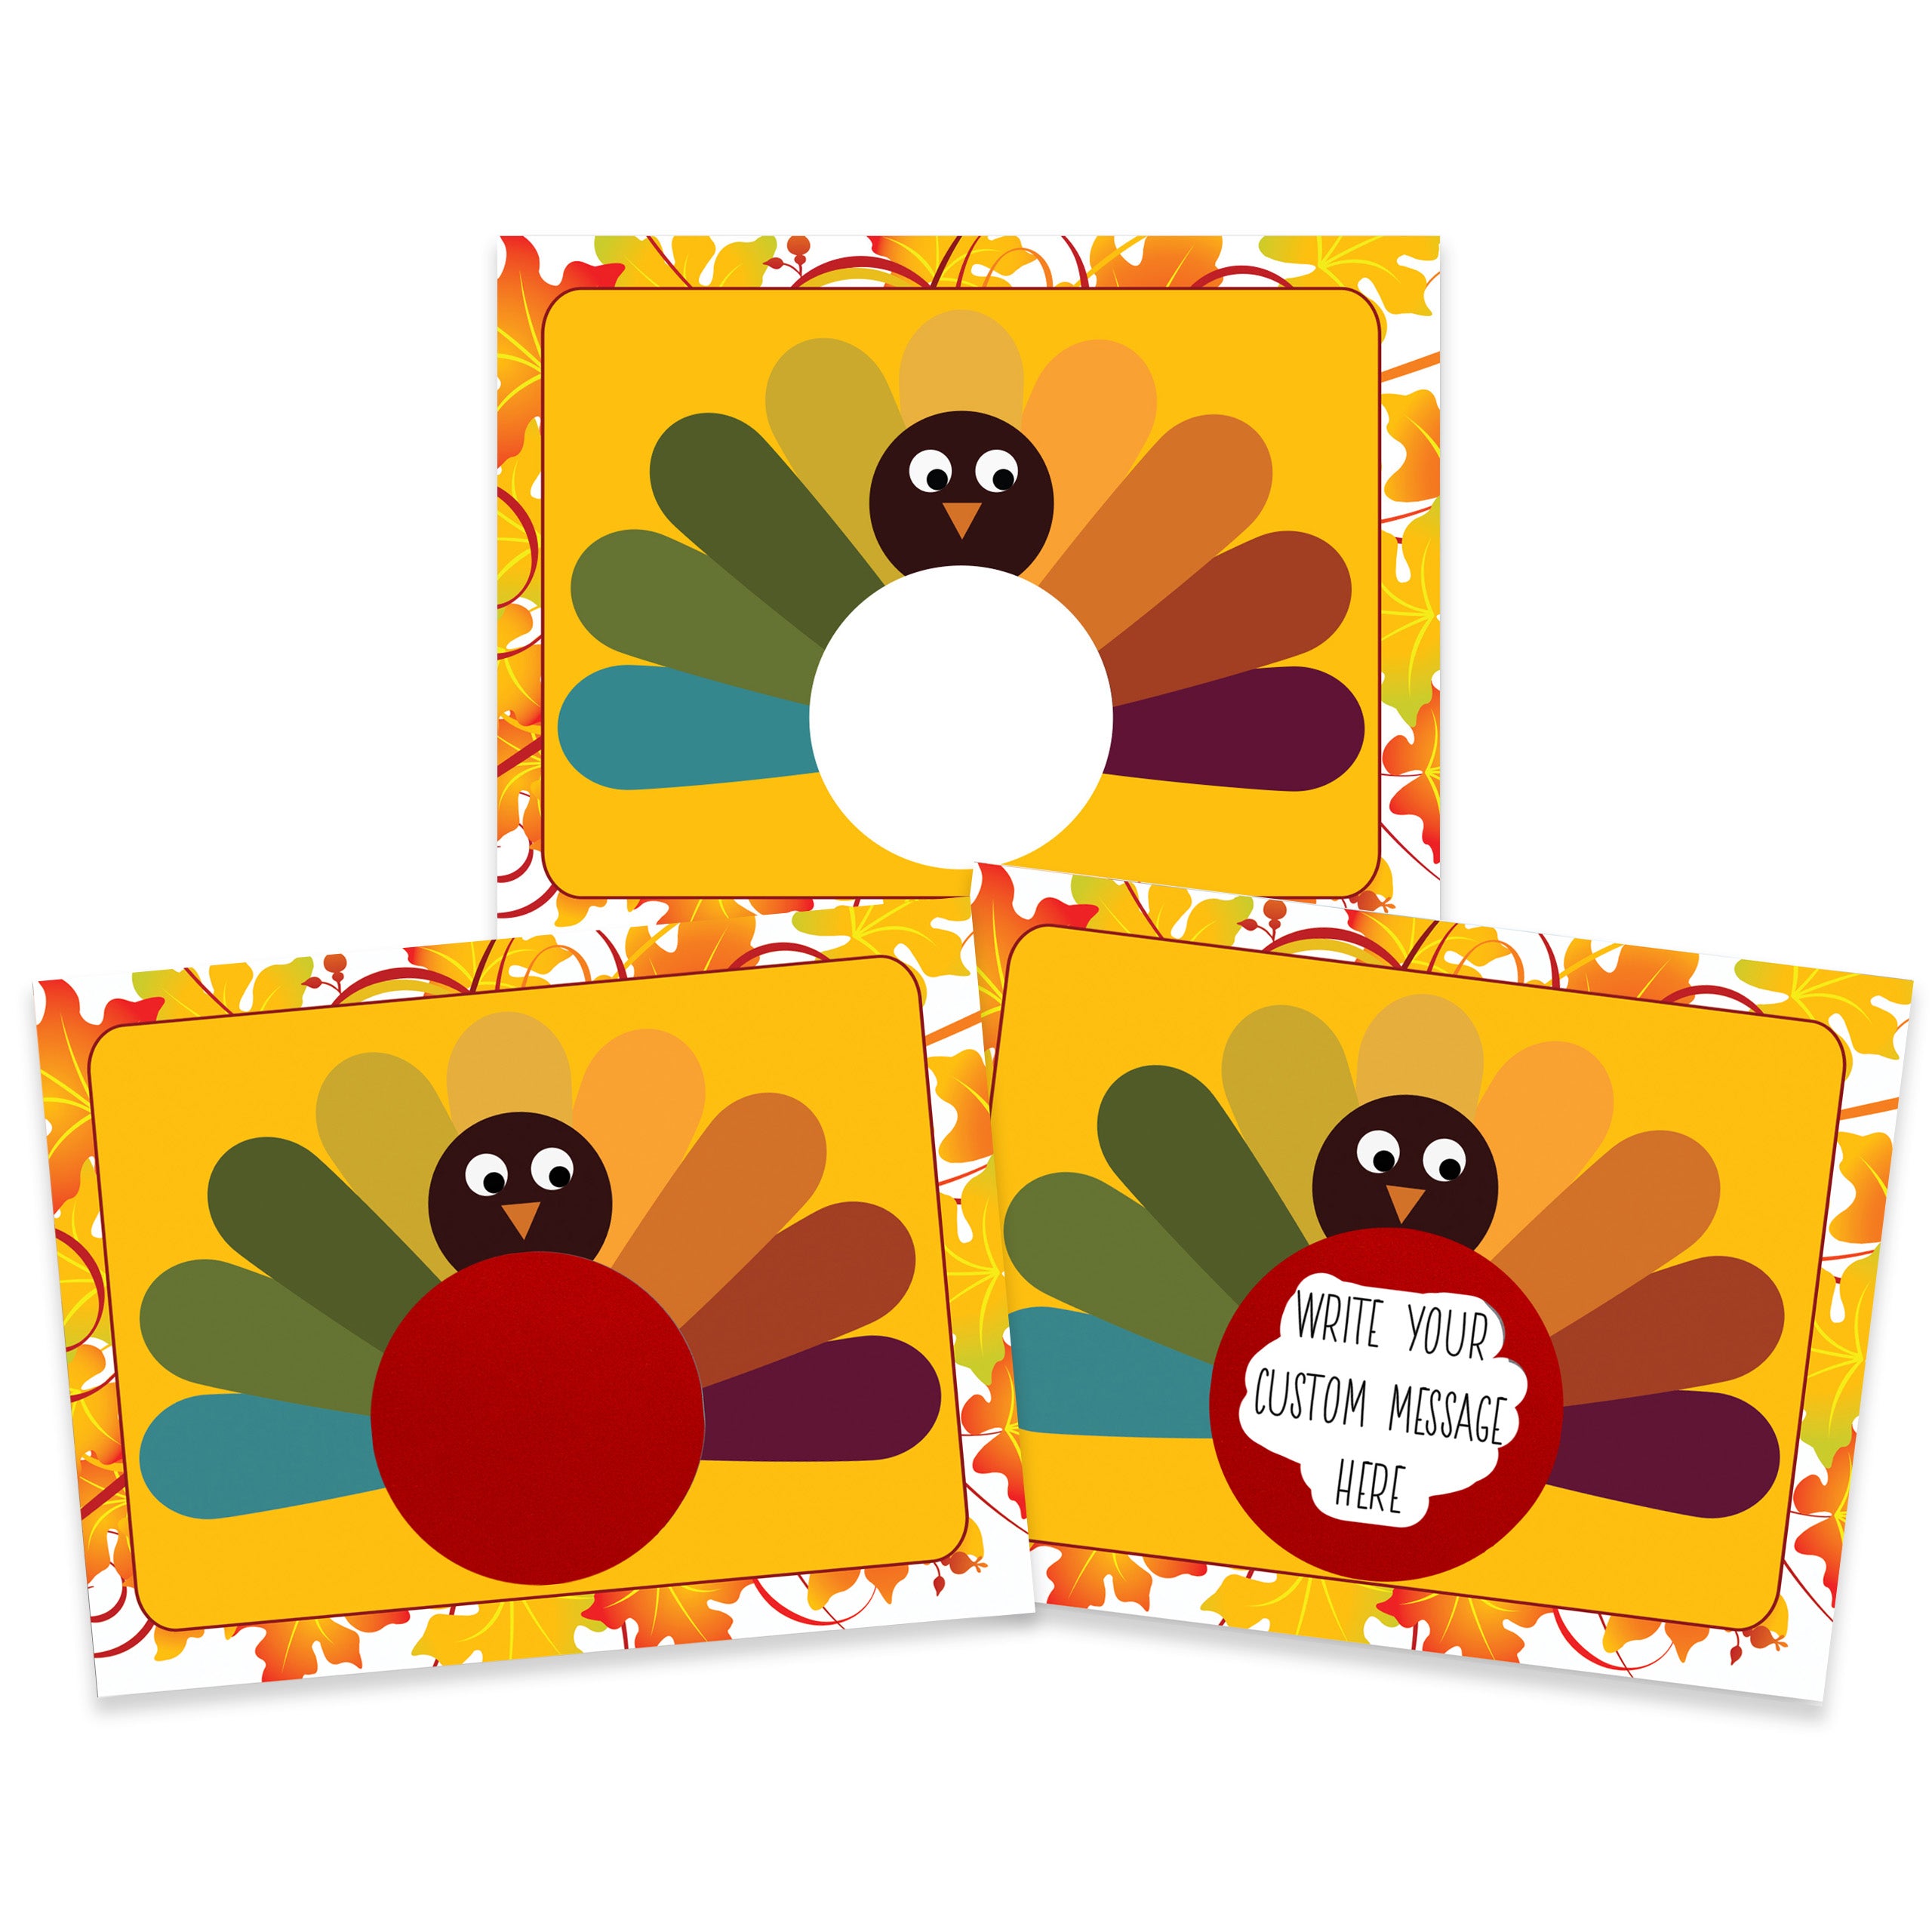 DIY Thanksgiving Turkey Make Your Own Scratch Offs - 20 Cards and 20 Scratch Off Stickers